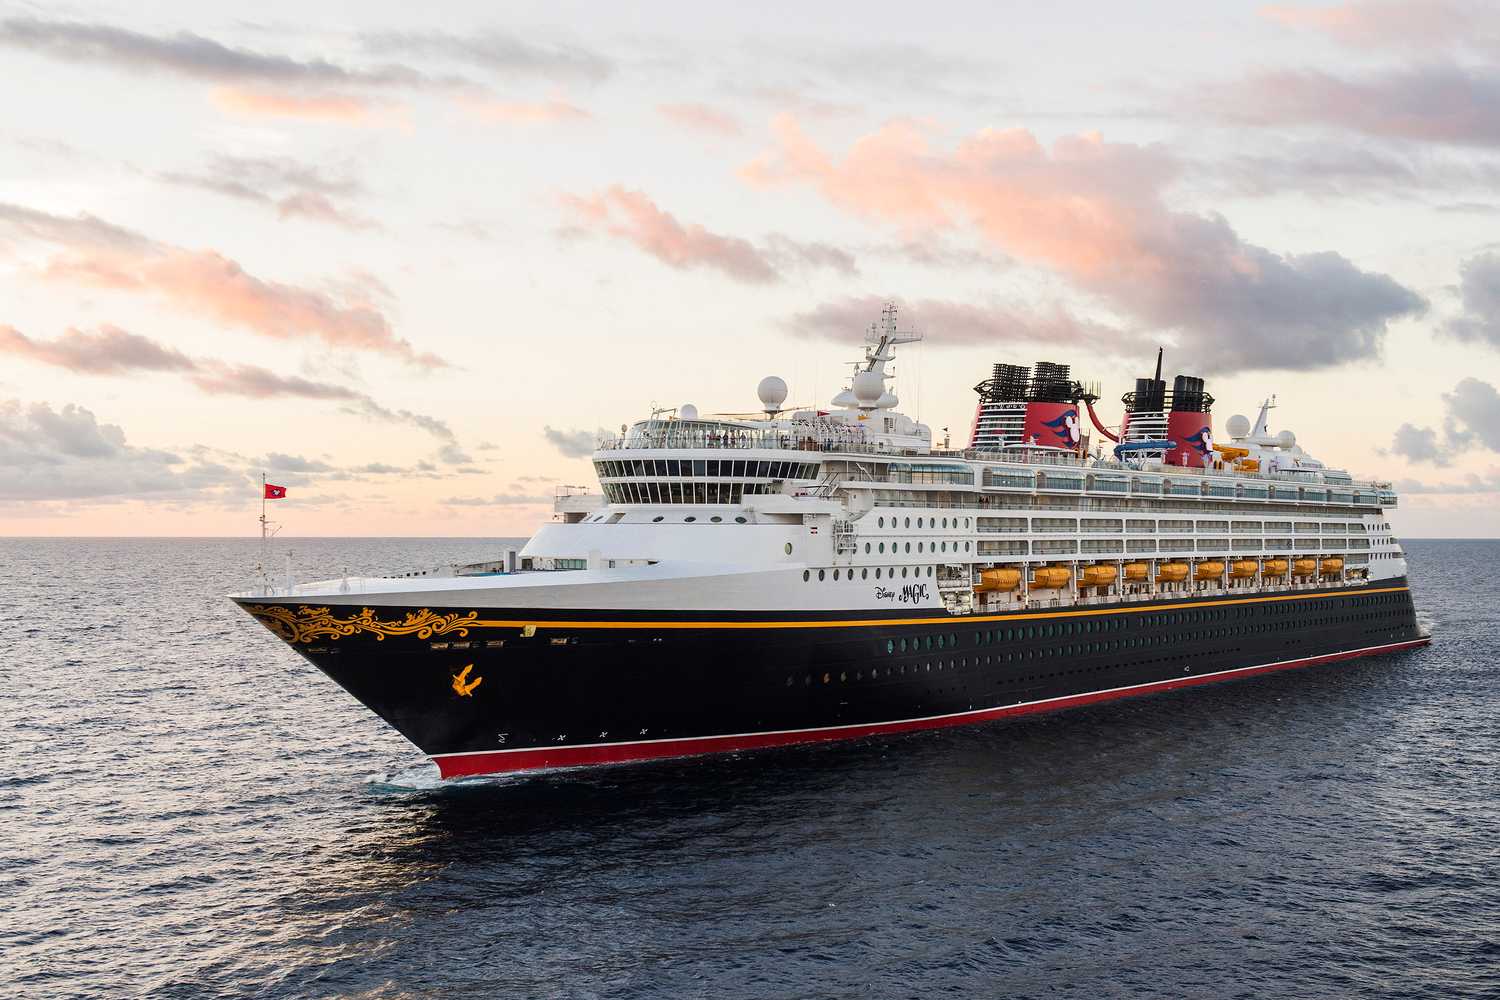 NEXT Executive Director Eric Weissman helped launch the Disney Cruise Line brand before the maiden voyage of the Disney Magic, shown here. (Photo/Provided)